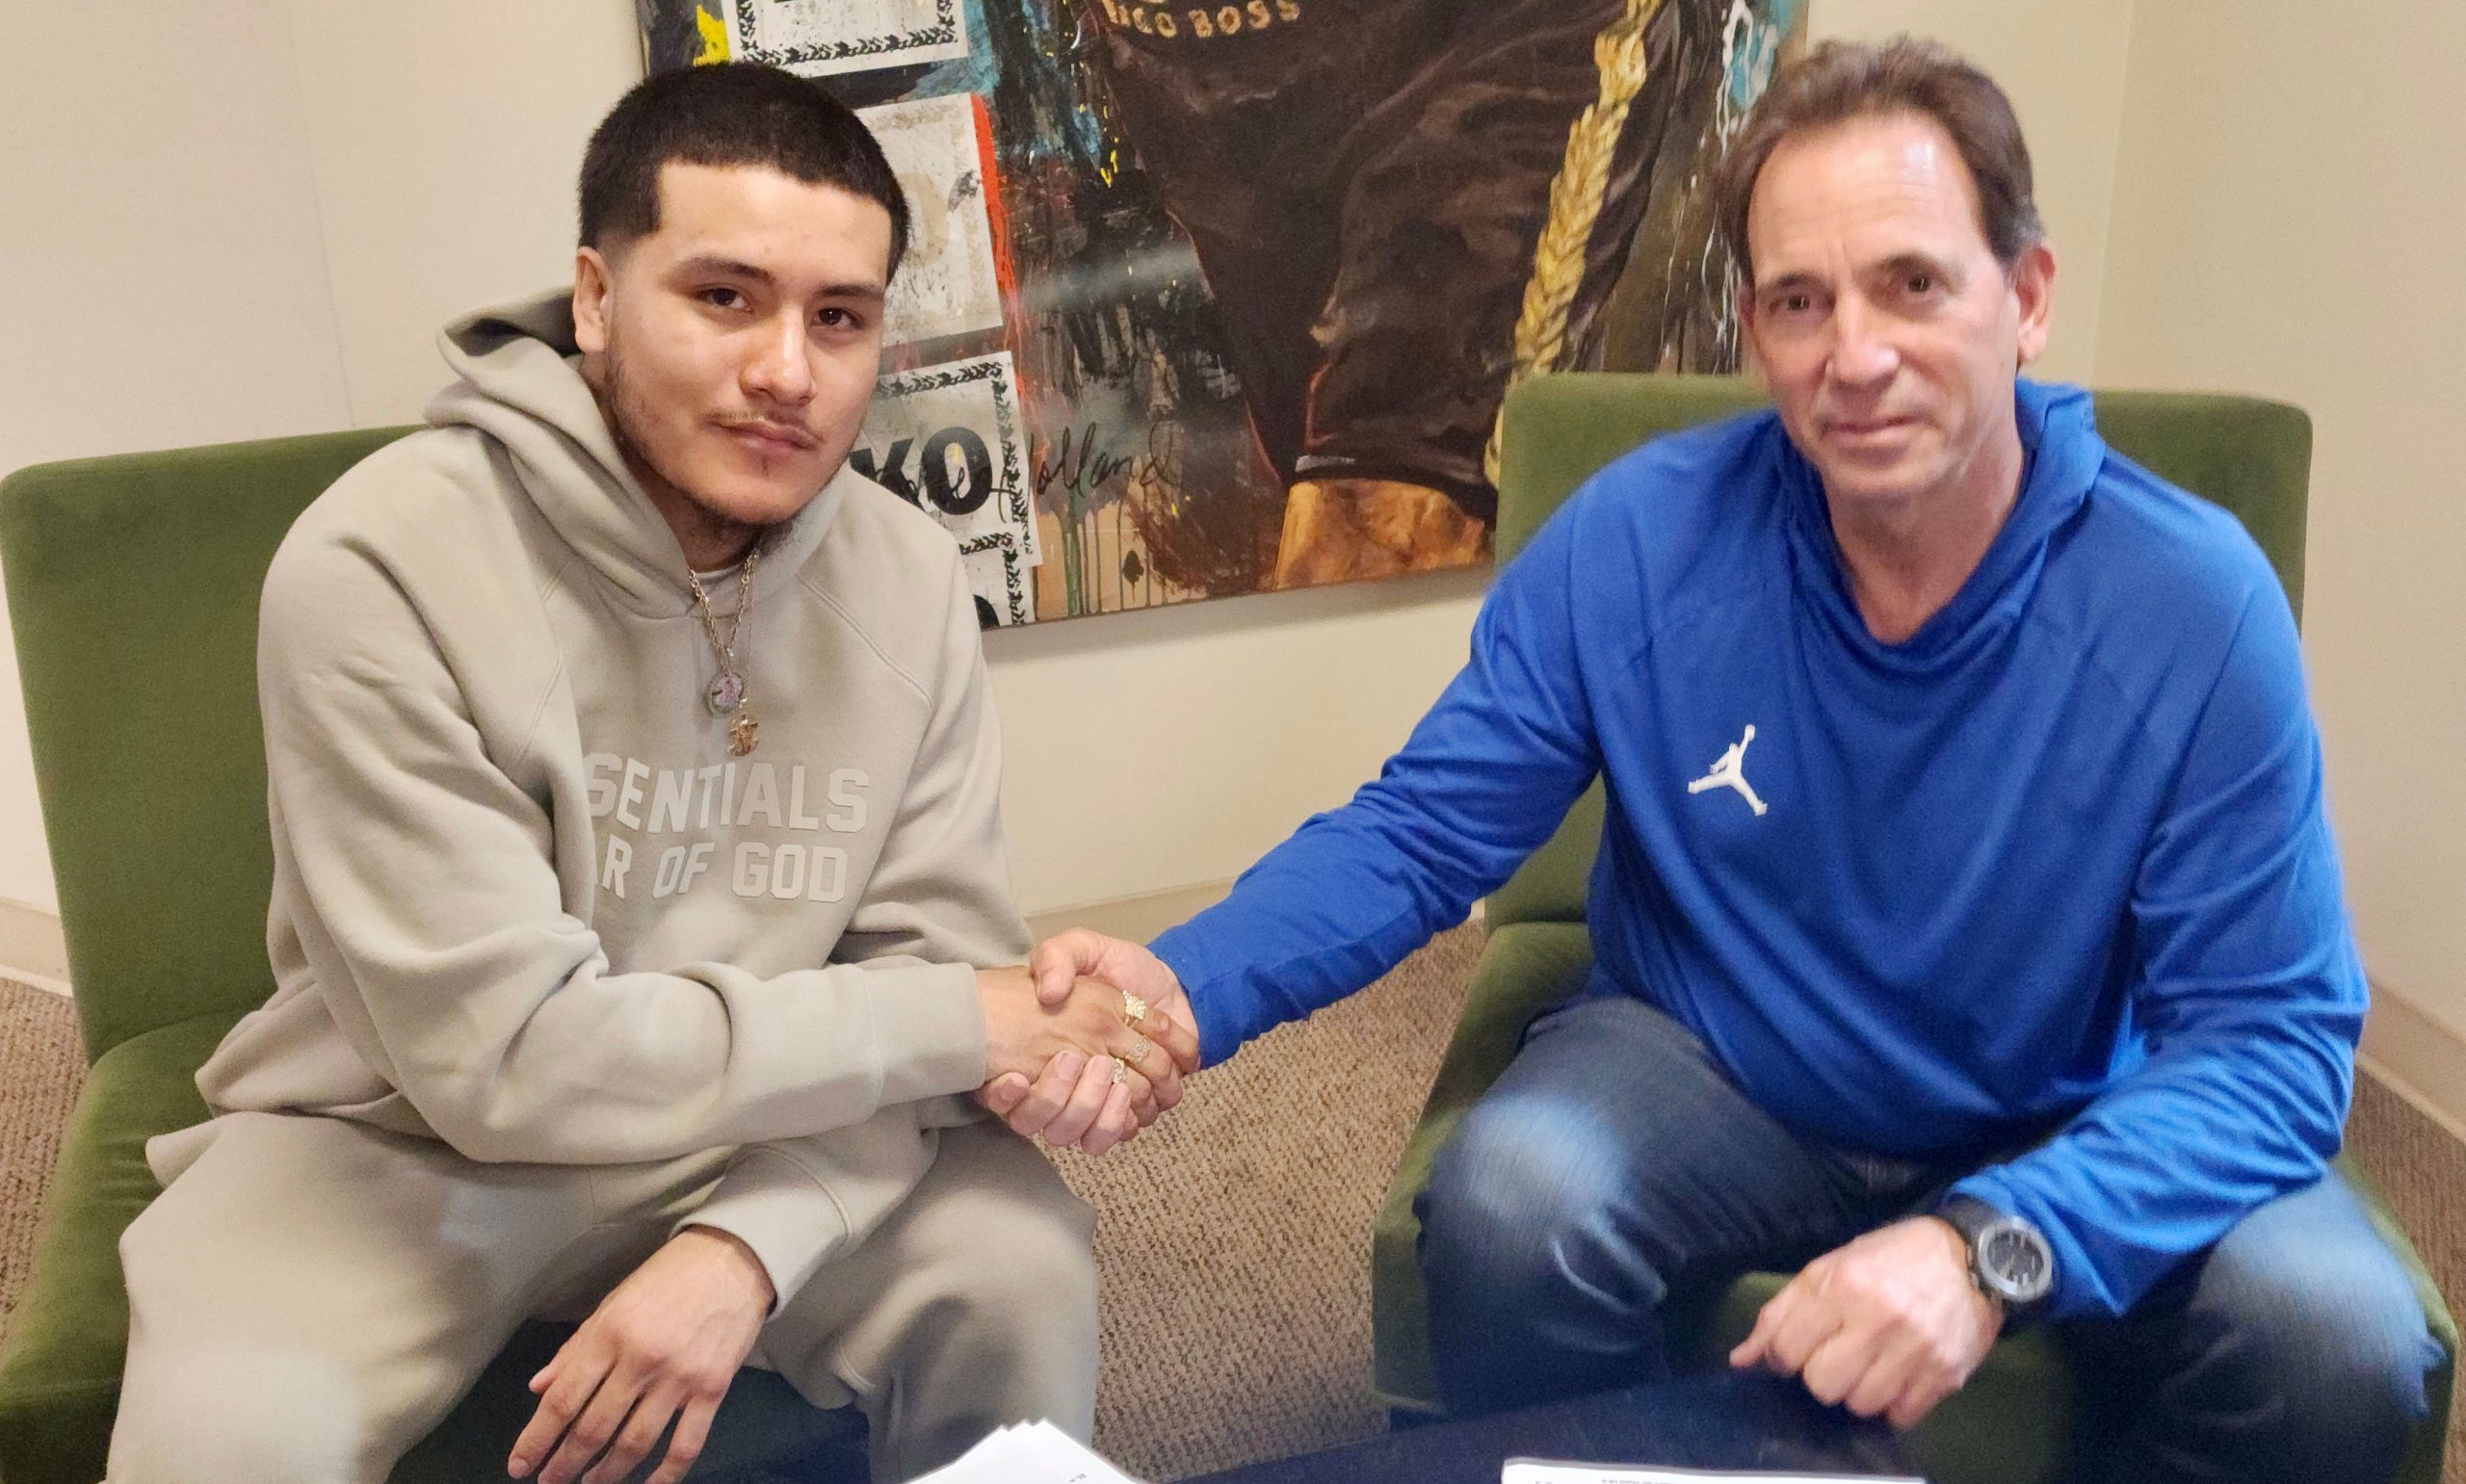 Cain Sandoval signs with 360 Promotions, will fight April 14 against Jose Angulo